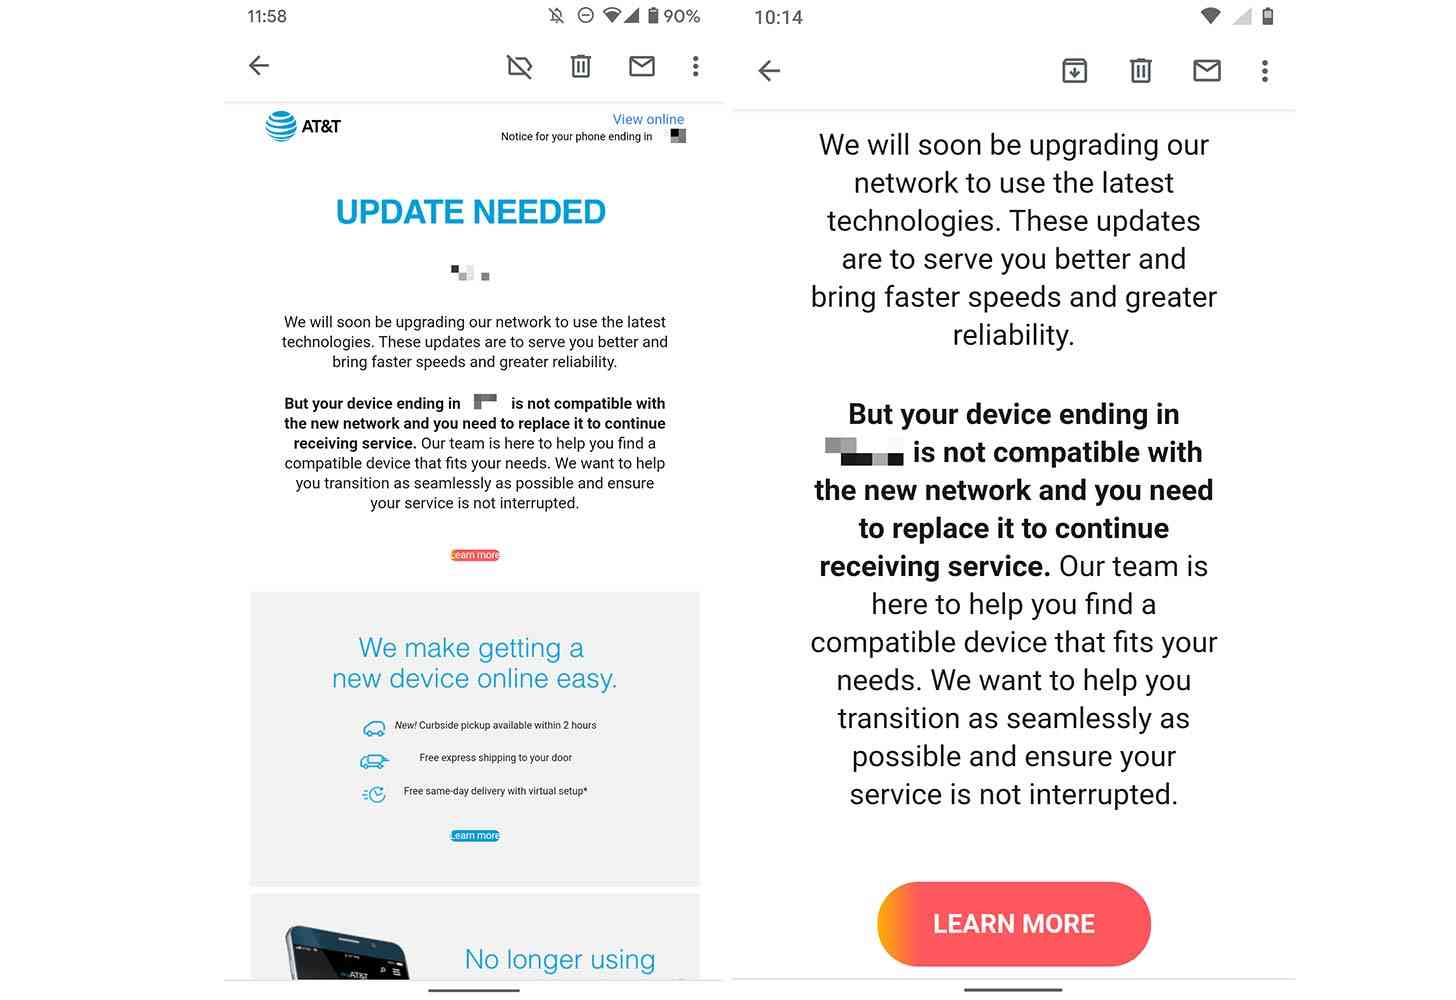 att-sends-confusing-email-to-customers